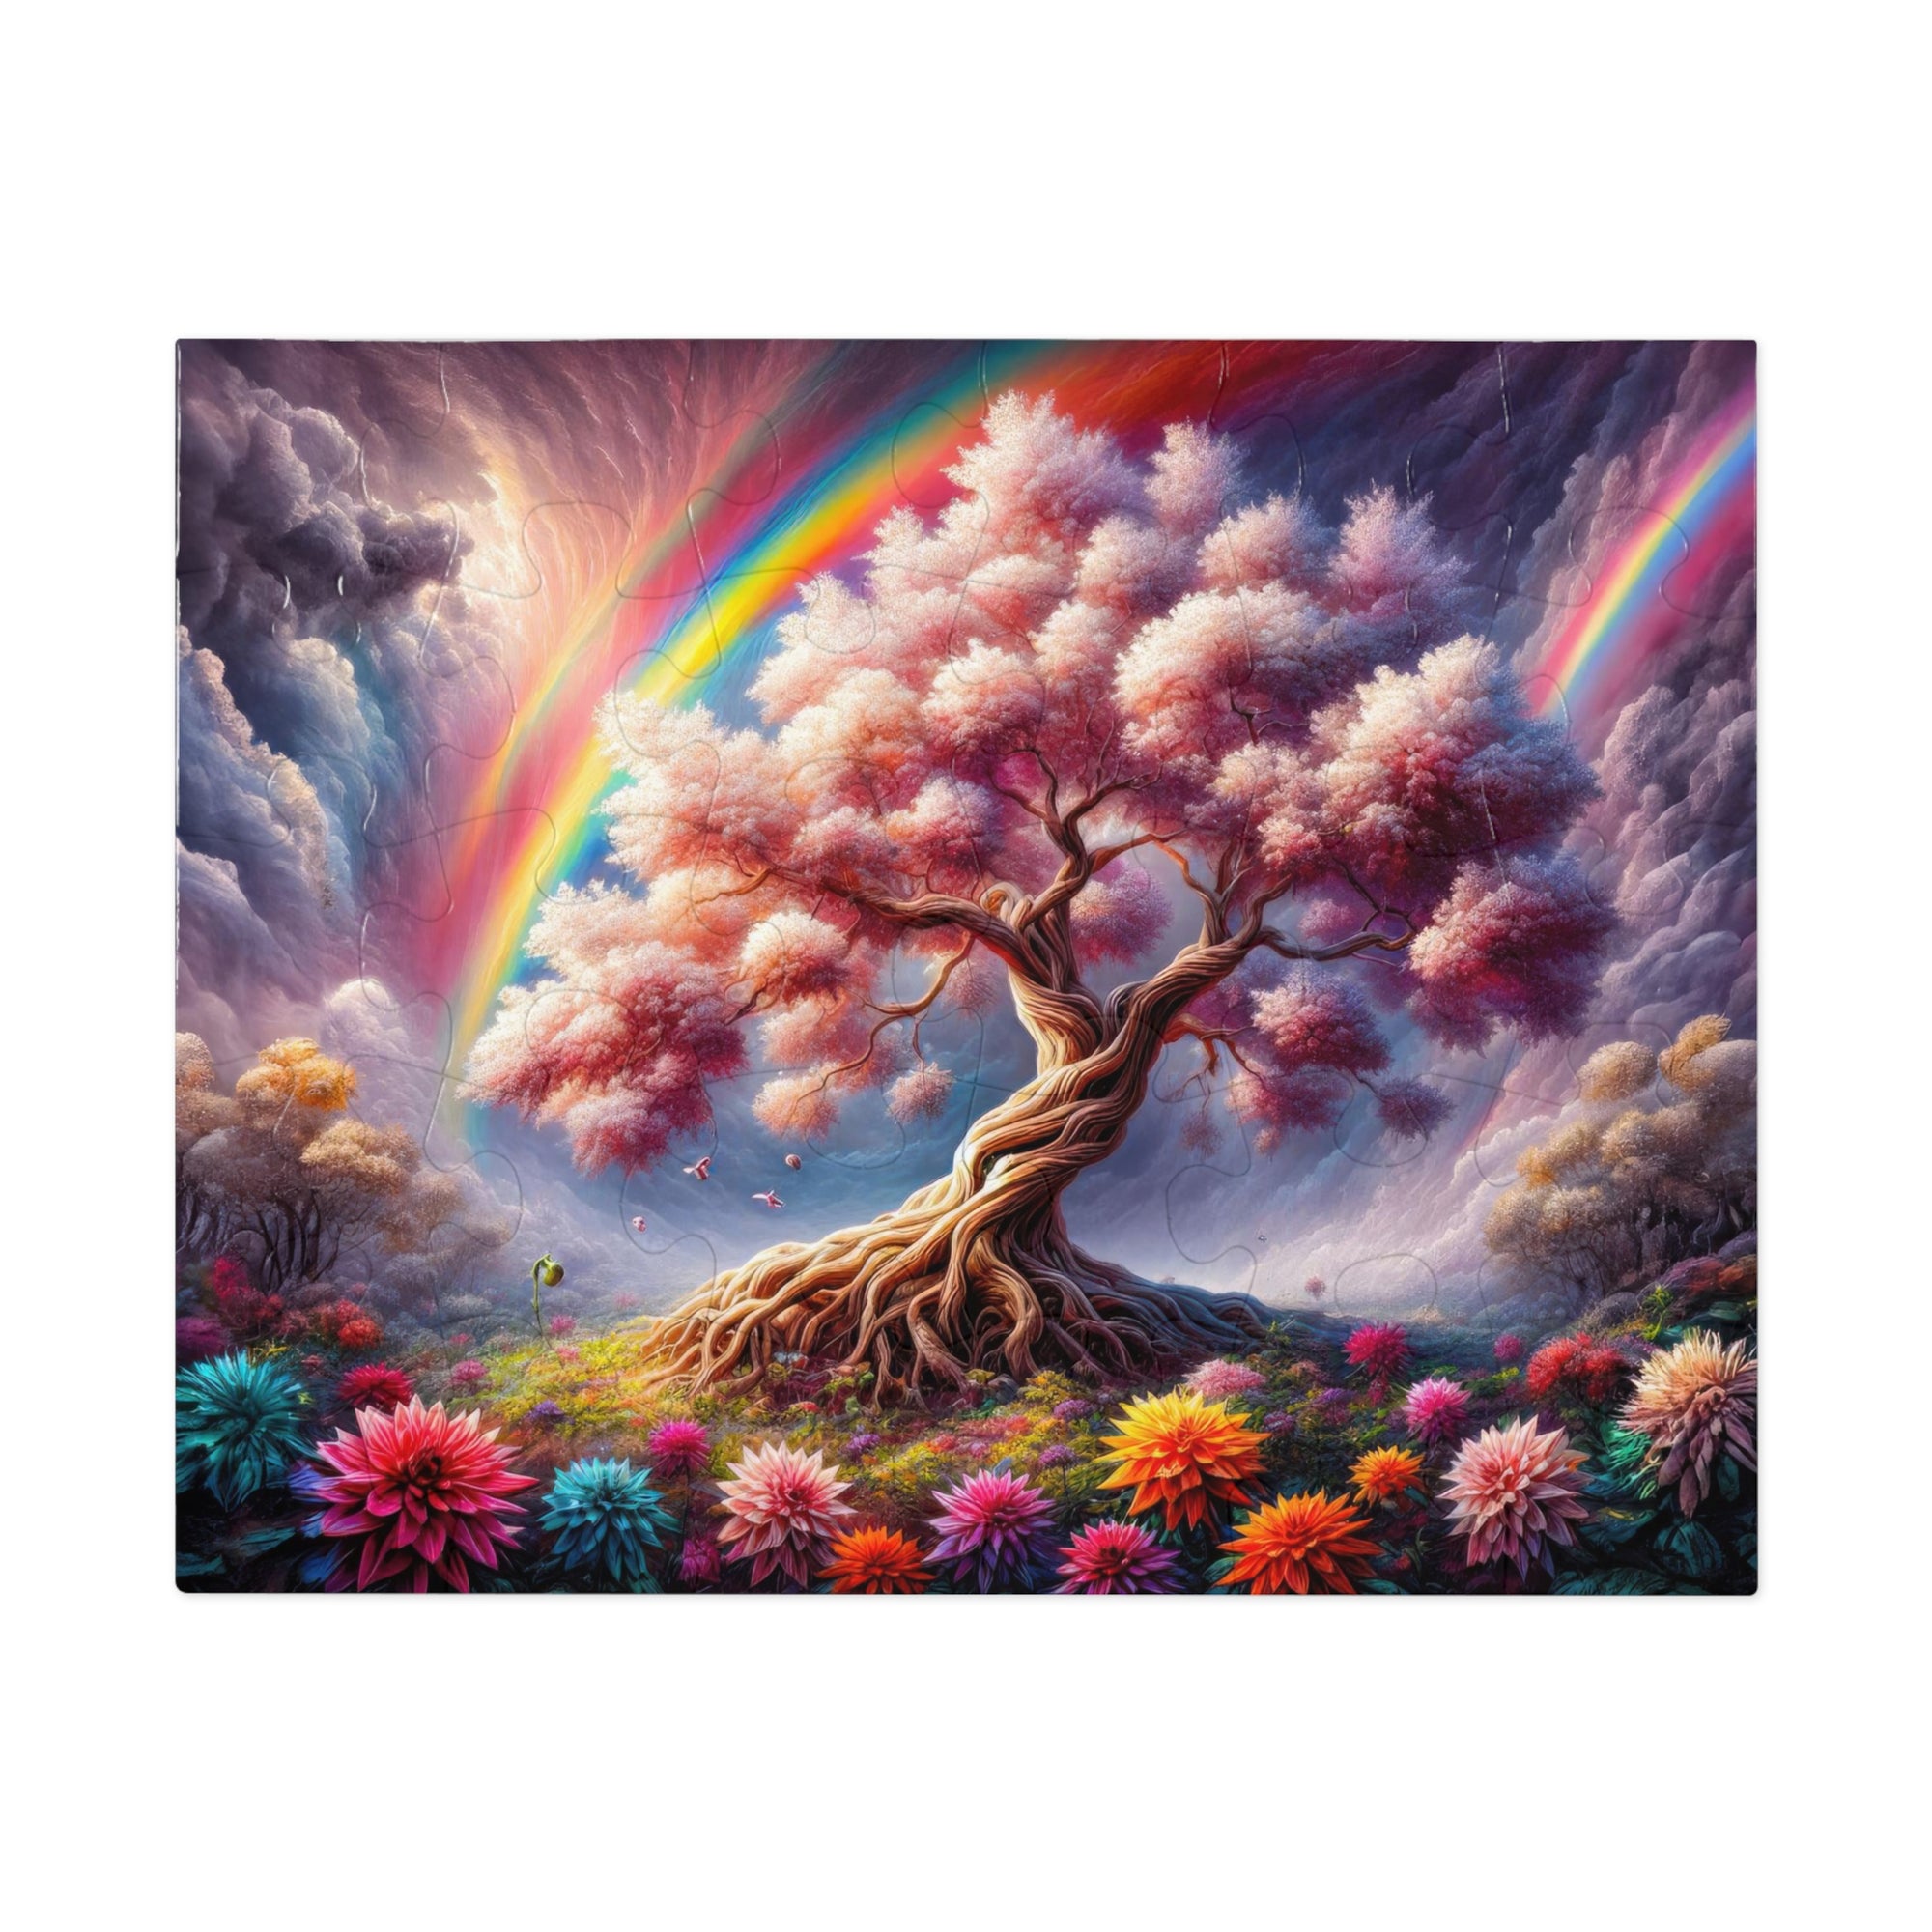 The Tree of Hues Jigsaw Puzzle